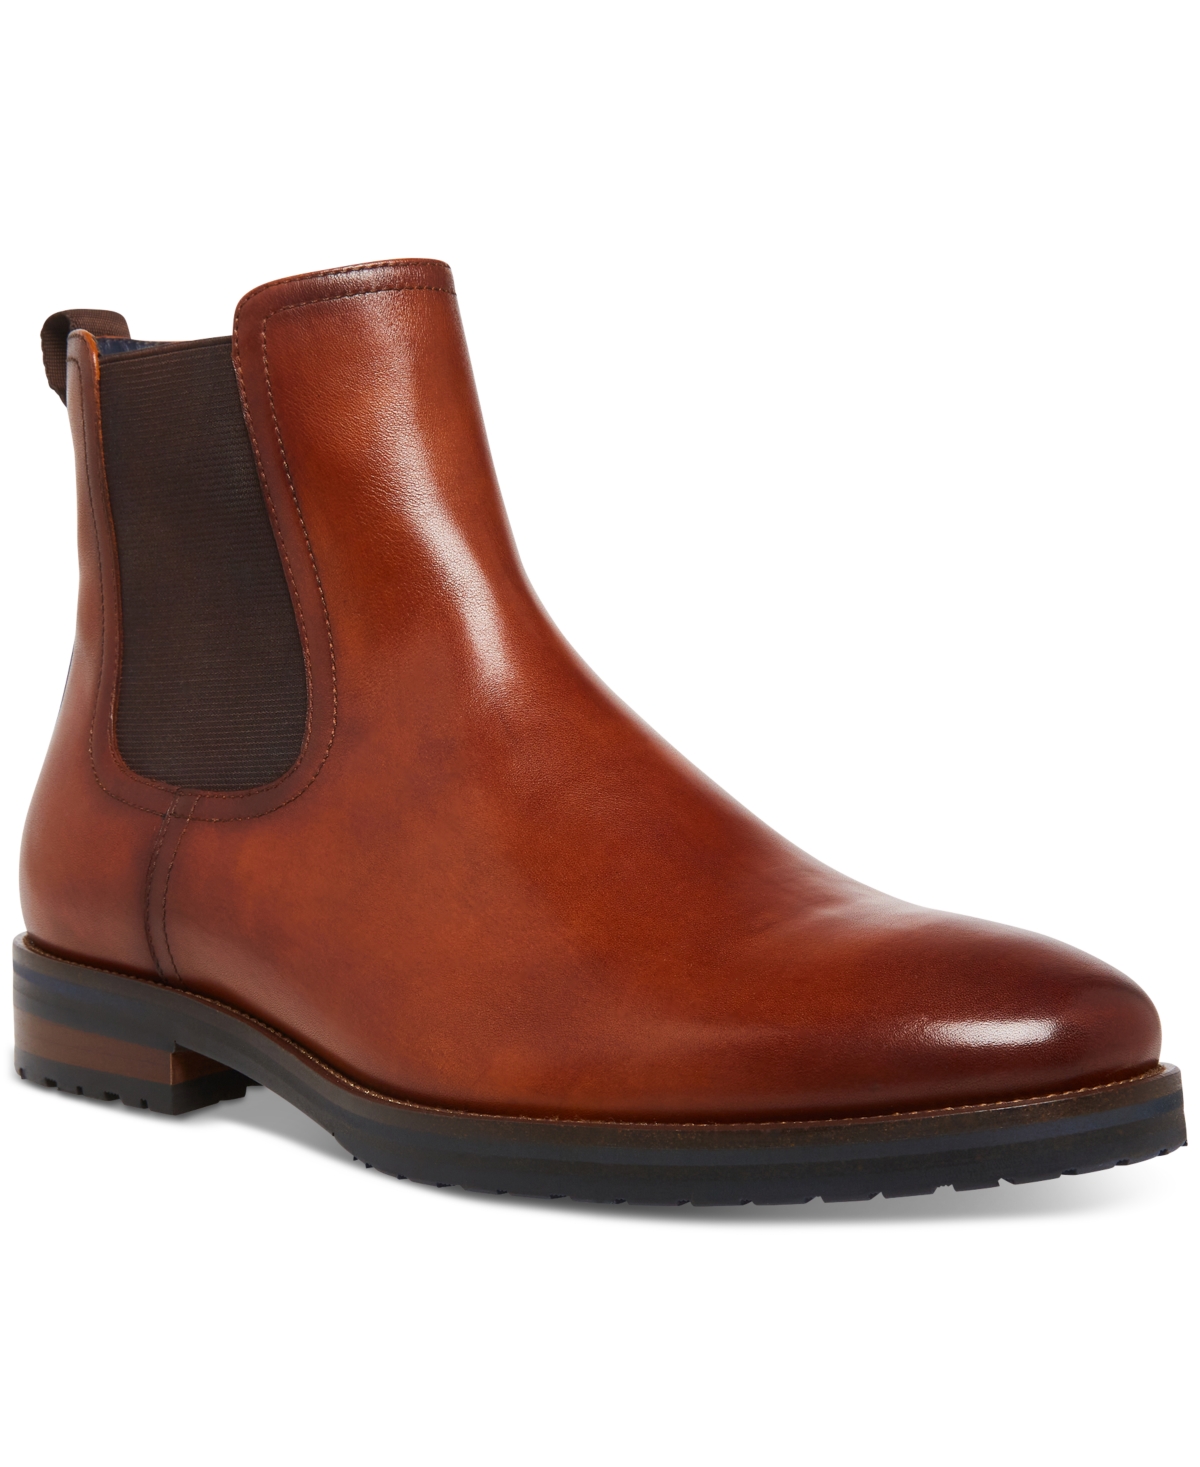 Men's Sully Chelsea Boots - Tan